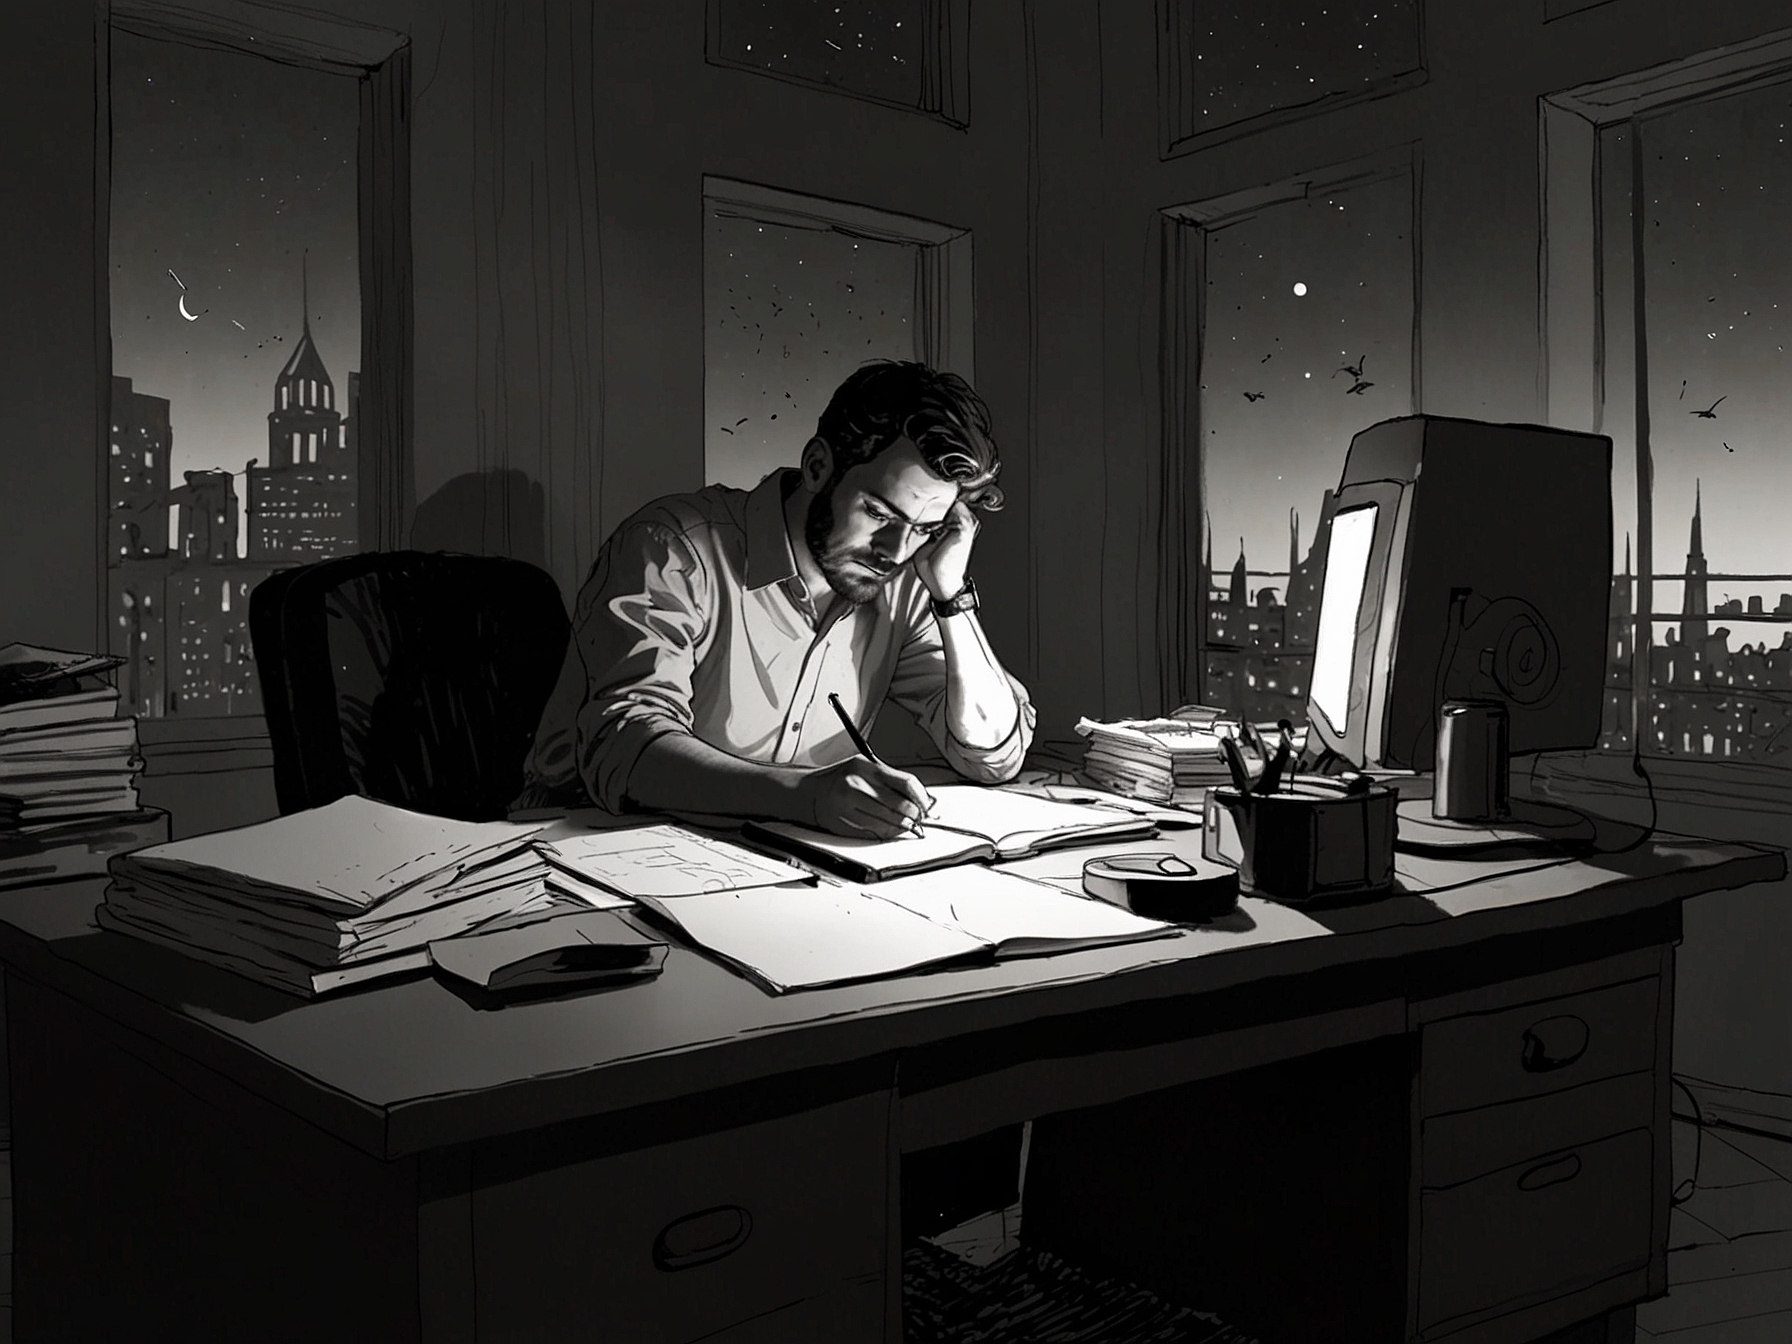 A depiction of the author keeping a sleep diary at a desk, reflecting the meticulous tracking of sleep patterns and the progress made through the CBT-i treatment.